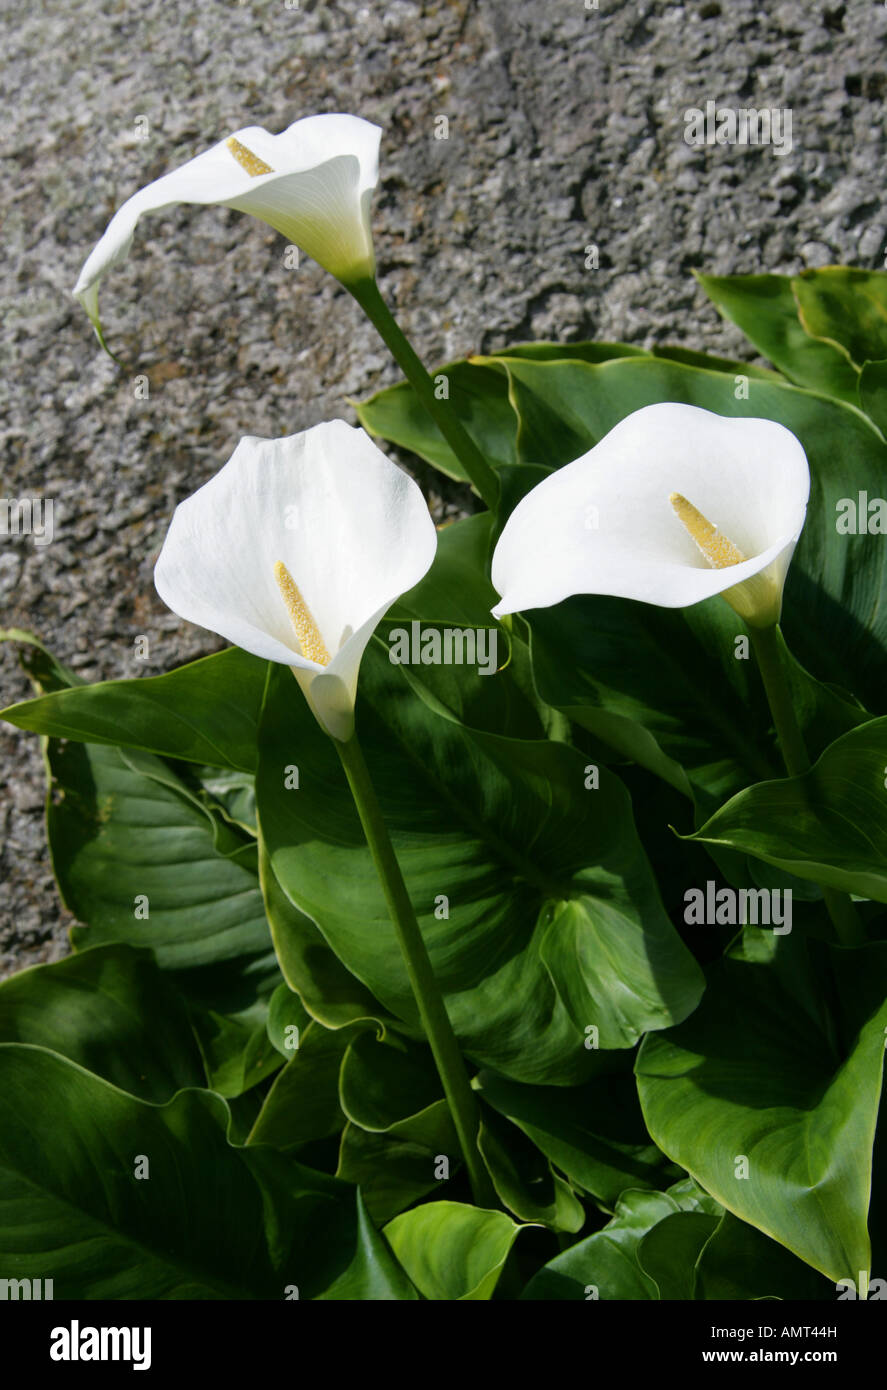 Lily Of The Nile oder Calla Lilie, Zantedeschia Aethiopica, Aronstabgewächse. Stockfoto